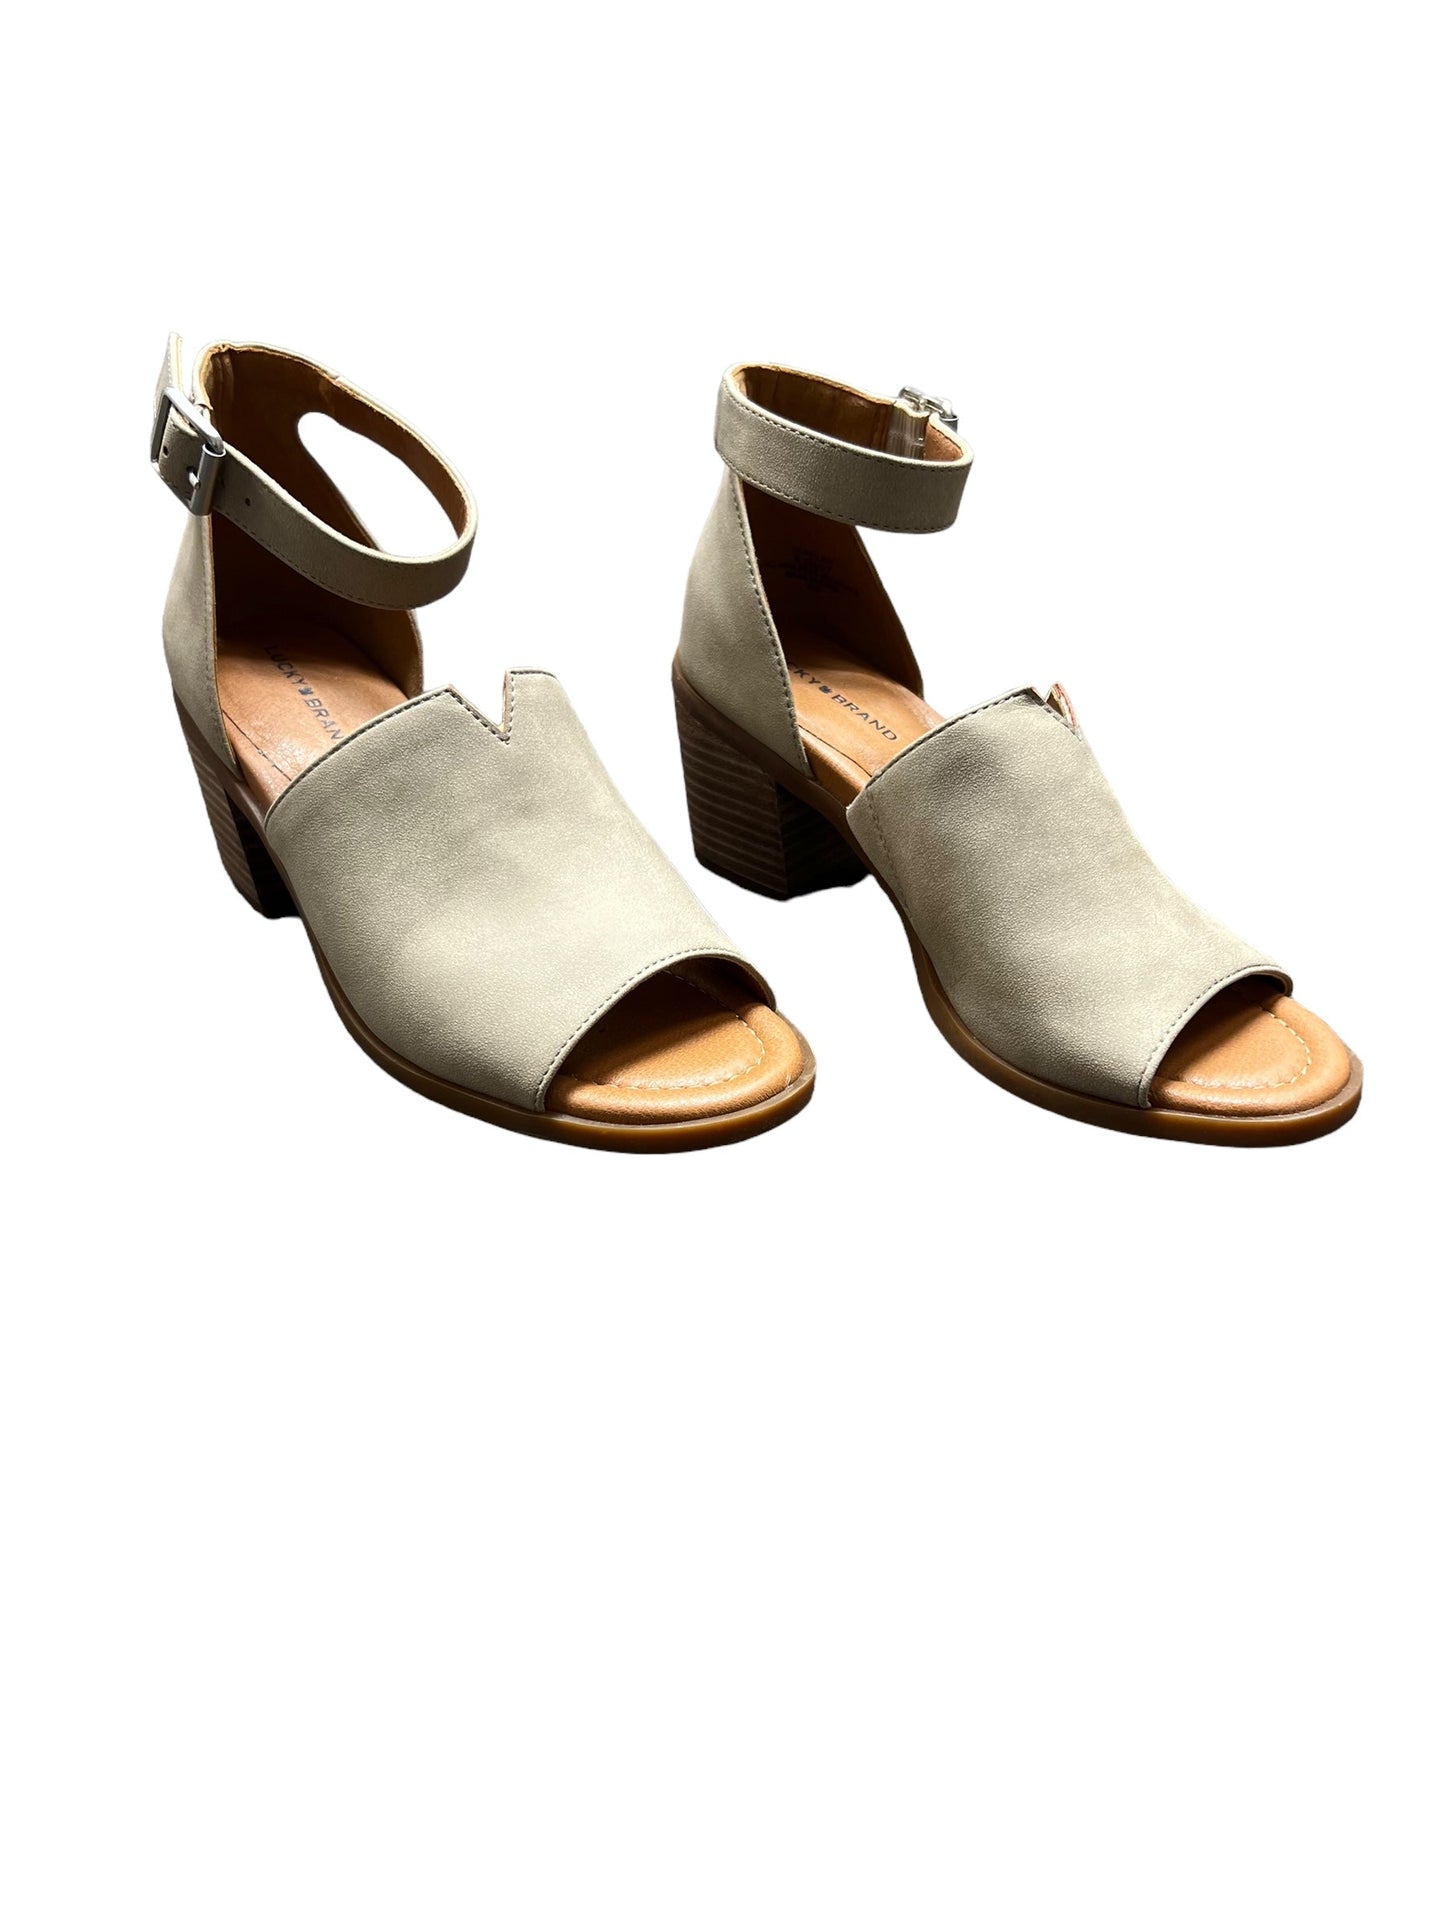 Taupe Sandals Heels Block Lucky Brand, Size 6.5